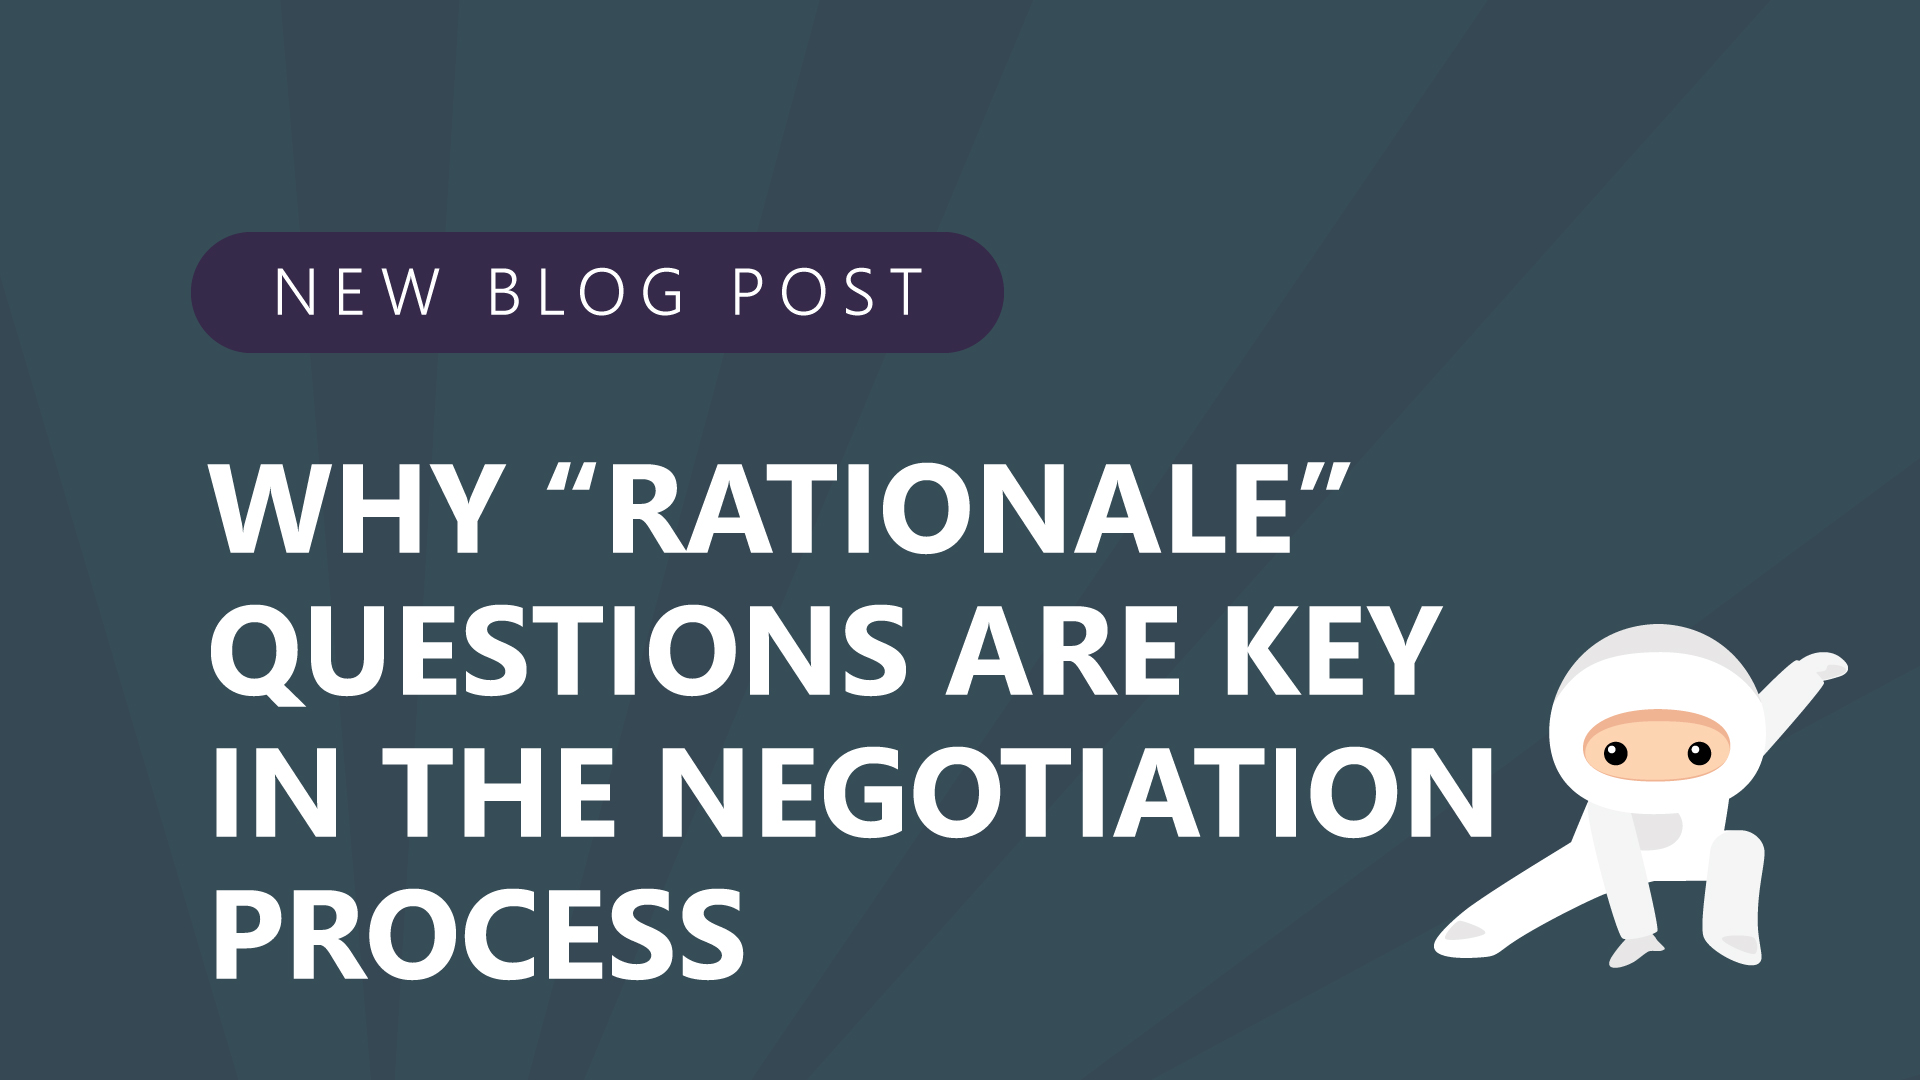 26-Why-Rationale-Questions-are-Key-in-the-Negotiation-Process.jpg